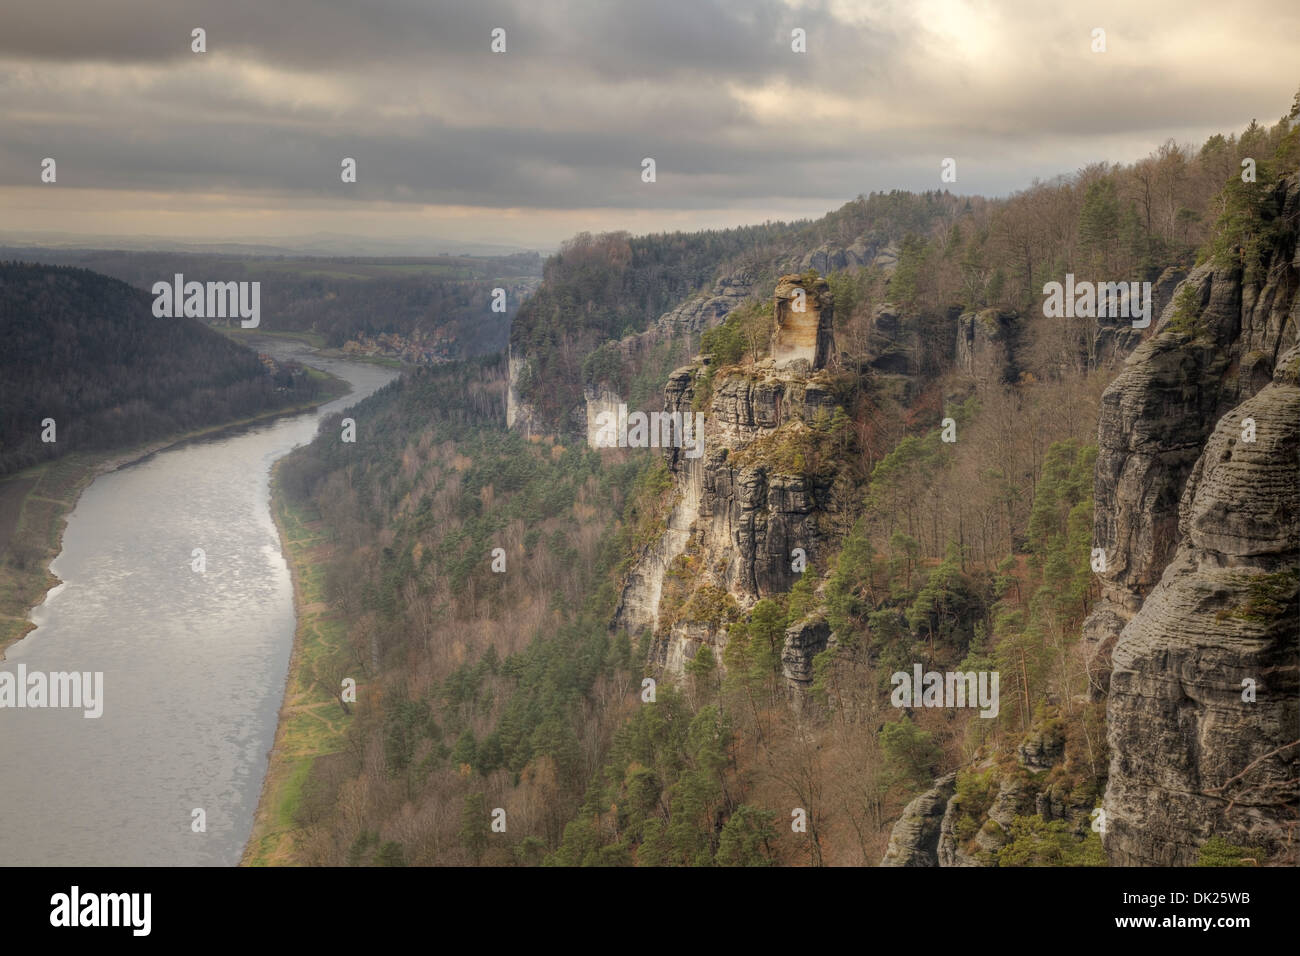 view from the Bastei over the Elbe River, Sächsische Schweiz National Park, Saxony, Germany Stock Photo